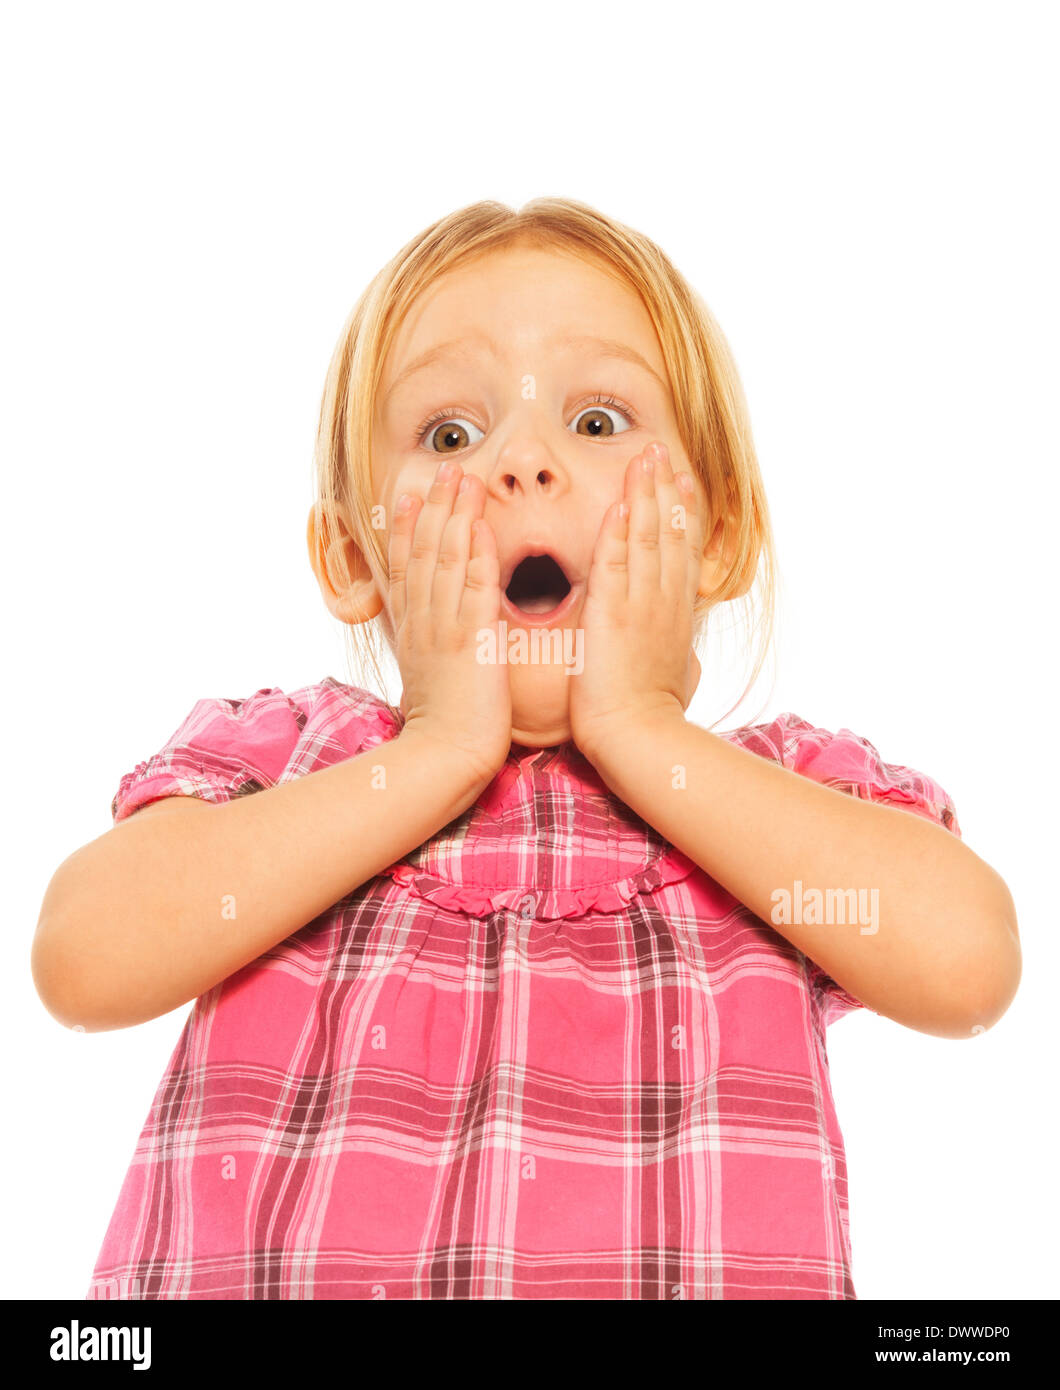 Shocked little blond 4 years old girl holding face with hands Stock Photo